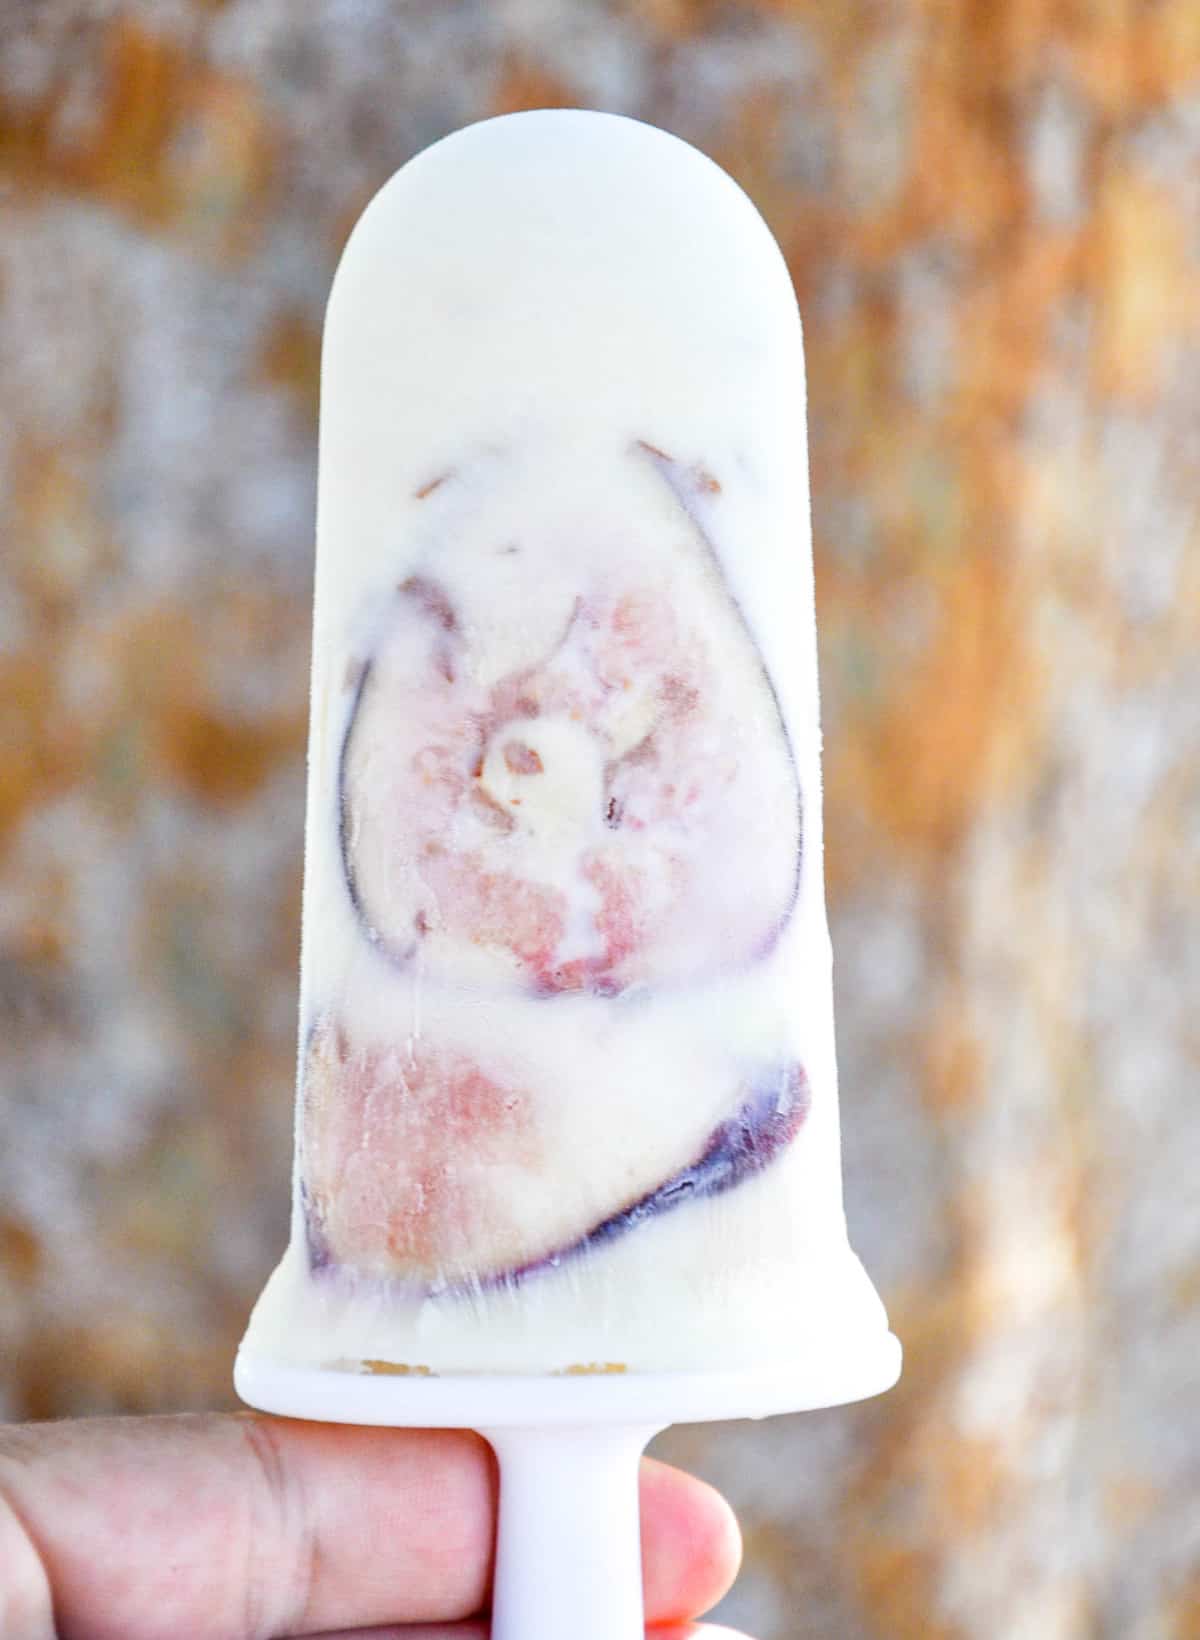 A Single Black Mission Fig and Almond Popsicle